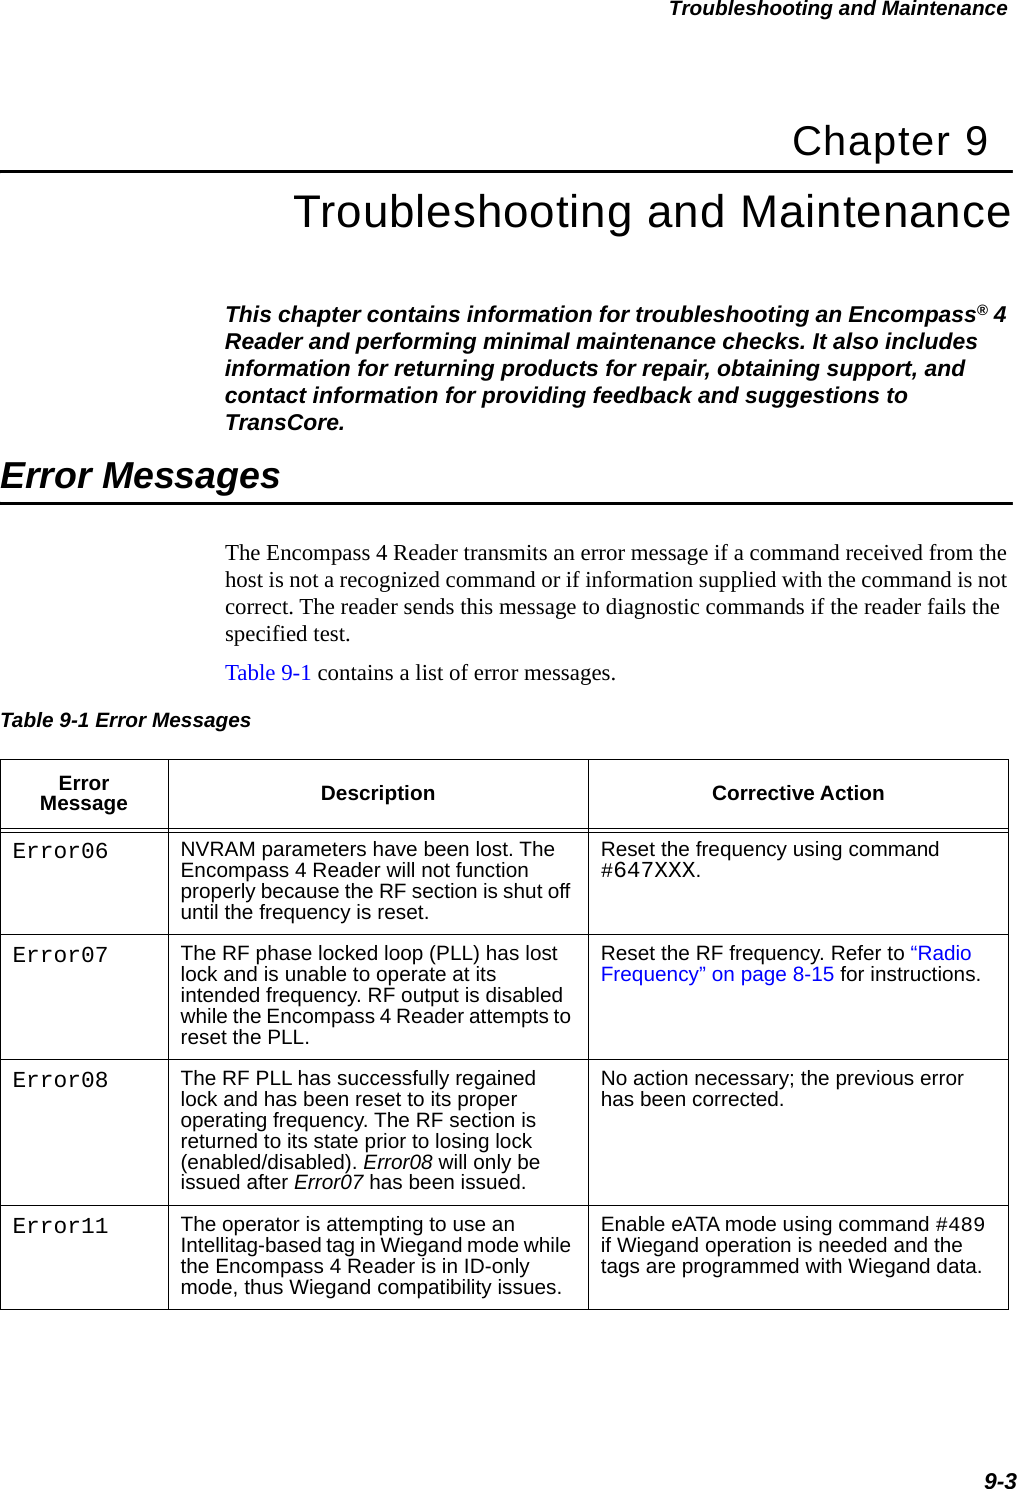 Troubleshooting and Maintenance9-3Chapter 9Troubleshooting and MaintenanceThis chapter contains information for troubleshooting an Encompass® 4 Reader and performing minimal maintenance checks. It also includes information for returning products for repair, obtaining support, and contact information for providing feedback and suggestions to TransCore. Error MessagesThe Encompass 4 Reader transmits an error message if a command received from the host is not a recognized command or if information supplied with the command is not correct. The reader sends this message to diagnostic commands if the reader fails the specified test.Table 9-1 contains a list of error messages. Table 9-1 Error Messages  Error Message Description Corrective ActionError06 NVRAM parameters have been lost. The Encompass 4 Reader will not function properly because the RF section is shut off until the frequency is reset.Reset the frequency using command #647XXX.Error07 The RF phase locked loop (PLL) has lost lock and is unable to operate at its intended frequency. RF output is disabled while the Encompass 4 Reader attempts to reset the PLL.Reset the RF frequency. Refer to “Radio Frequency” on page 8-15 for instructions. Error08 The RF PLL has successfully regained lock and has been reset to its proper operating frequency. The RF section is returned to its state prior to losing lock (enabled/disabled). Error08 will only be issued after Error07 has been issued.No action necessary; the previous error has been corrected.Error11 The operator is attempting to use an Intellitag-based tag in Wiegand mode while the Encompass 4 Reader is in ID-only mode, thus Wiegand compatibility issues.Enable eATA mode using command #489 if Wiegand operation is needed and the tags are programmed with Wiegand data.